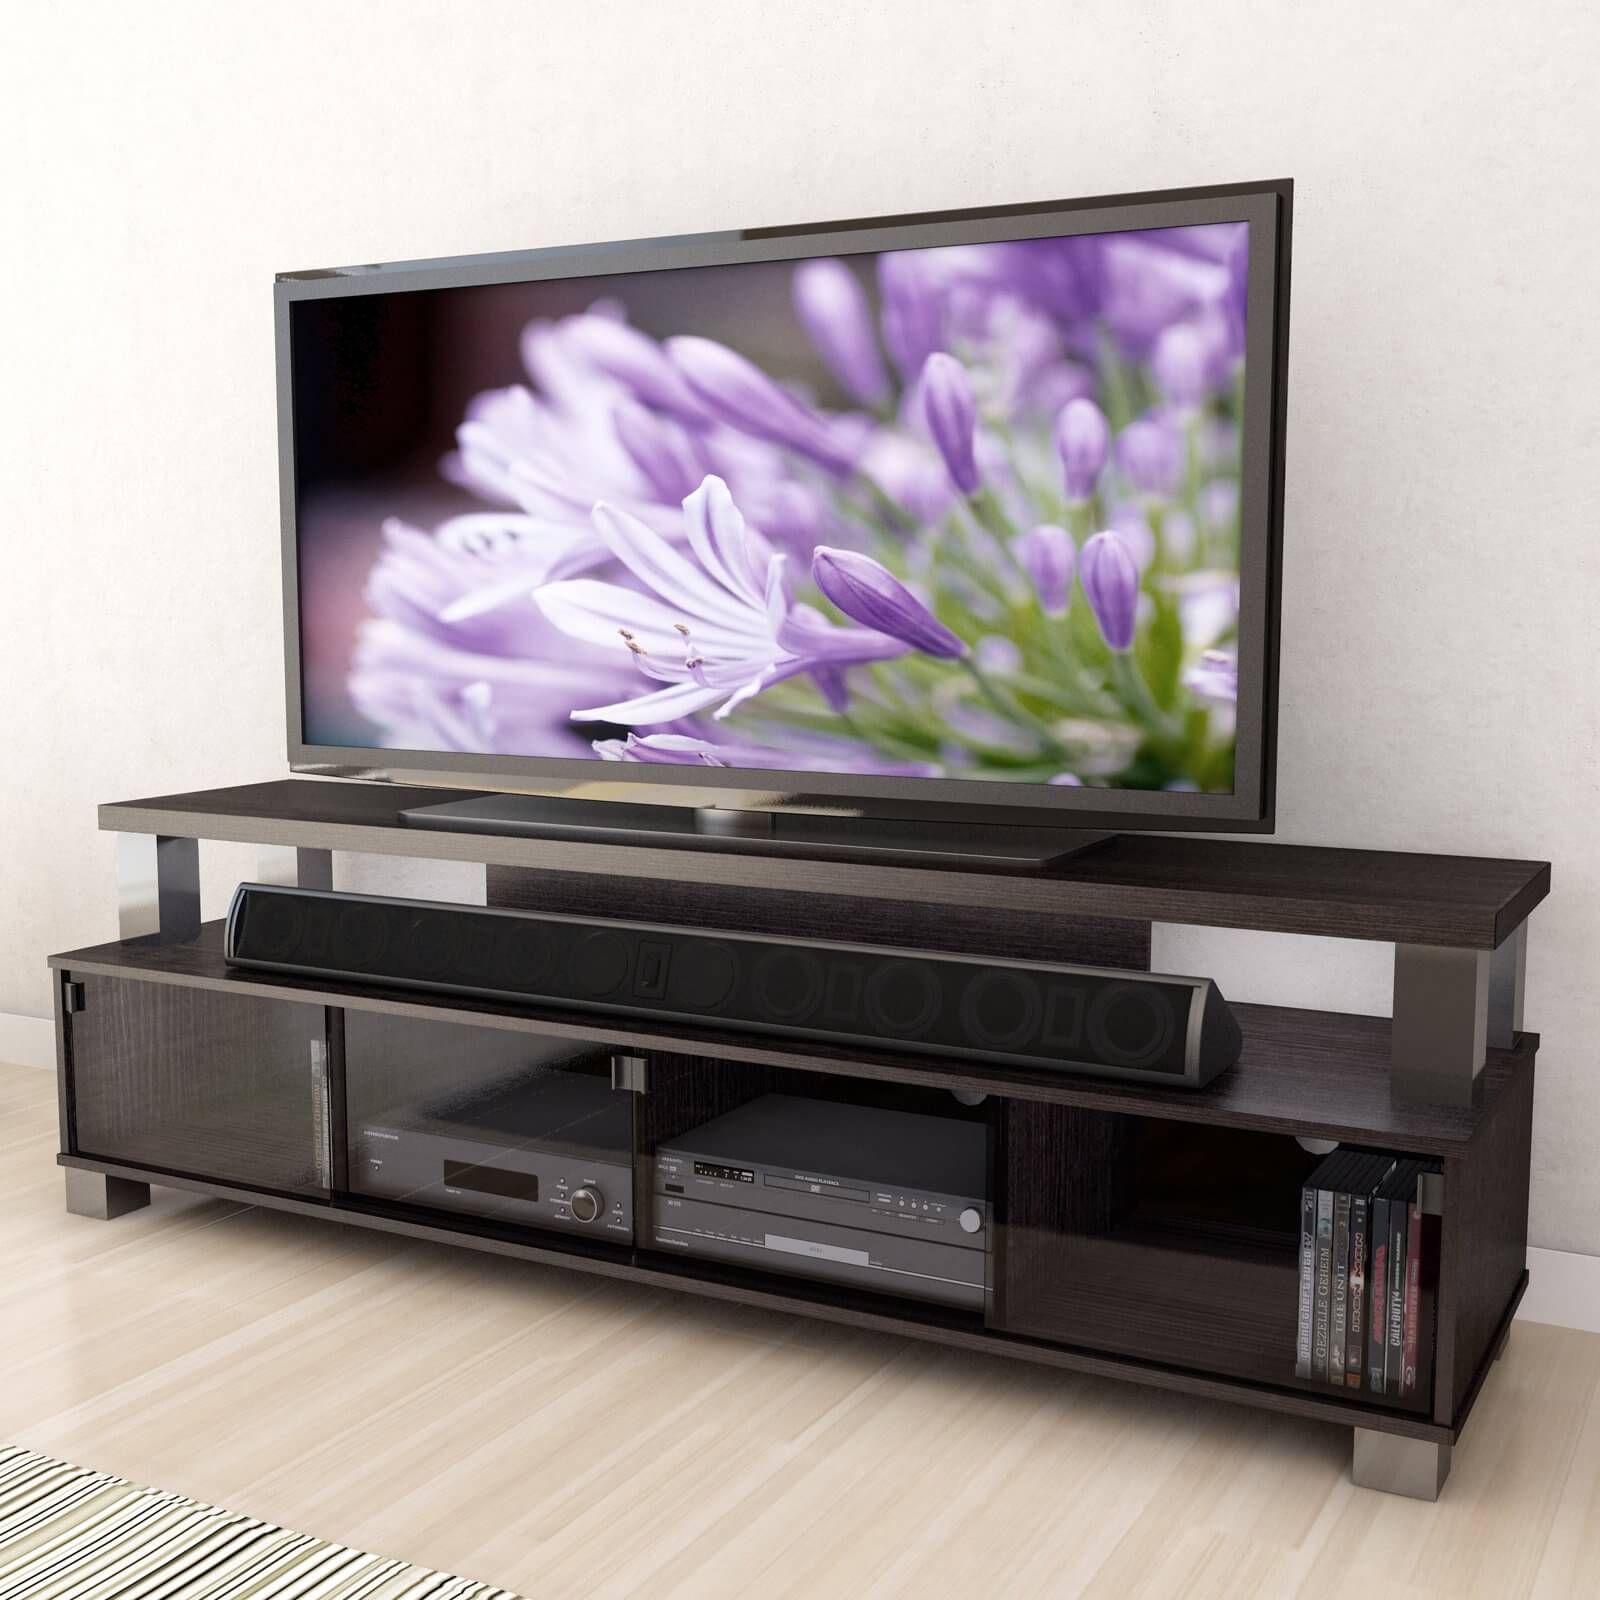 16 Types Of Tv Stands (comprehensive Buying Guide) Throughout Contemporary Tv Stands (View 13 of 15)